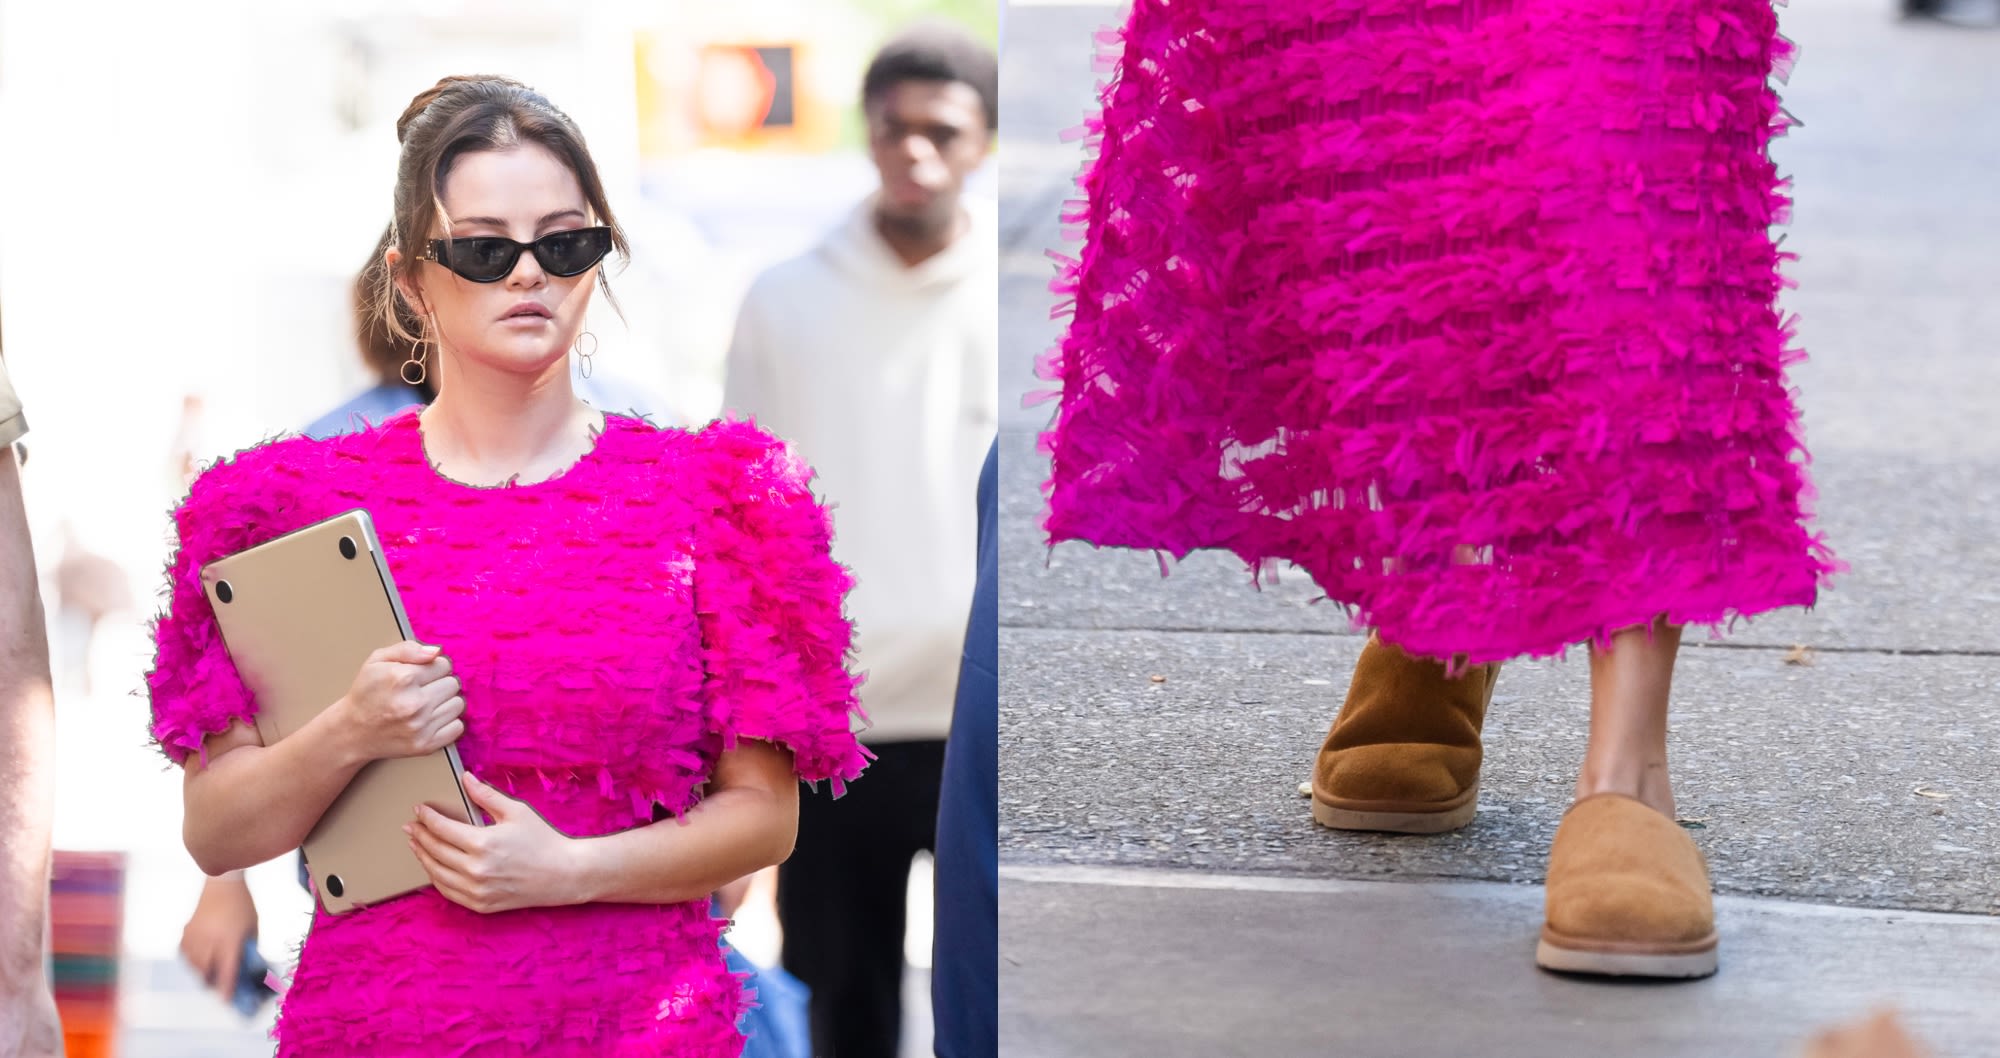 Selena Gomez Gets Comfy in Uggs in Ruffled Pink Dress on ‘Only Murders in the Building’ Set